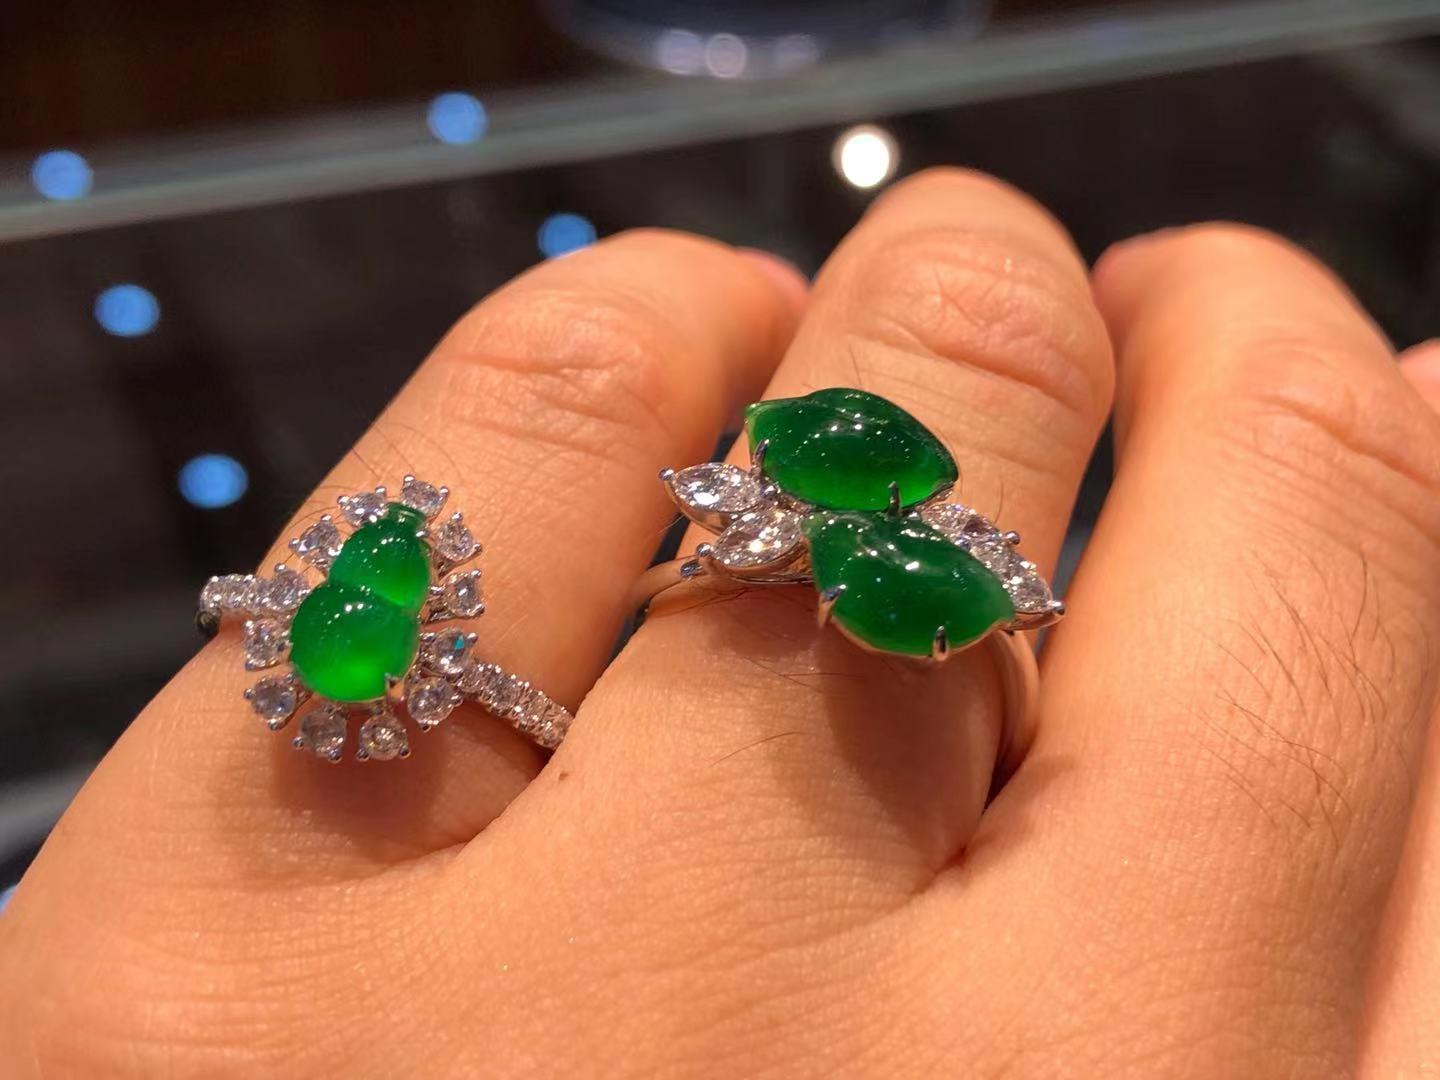 Please check out the HD video. This ring has the best imperial green color with a subtle mesmerizing glow! Here is an imperial green Jade and diamond ring. It is certified by 2 labs natural jadeite jade. The ring is set in 18k white gold and